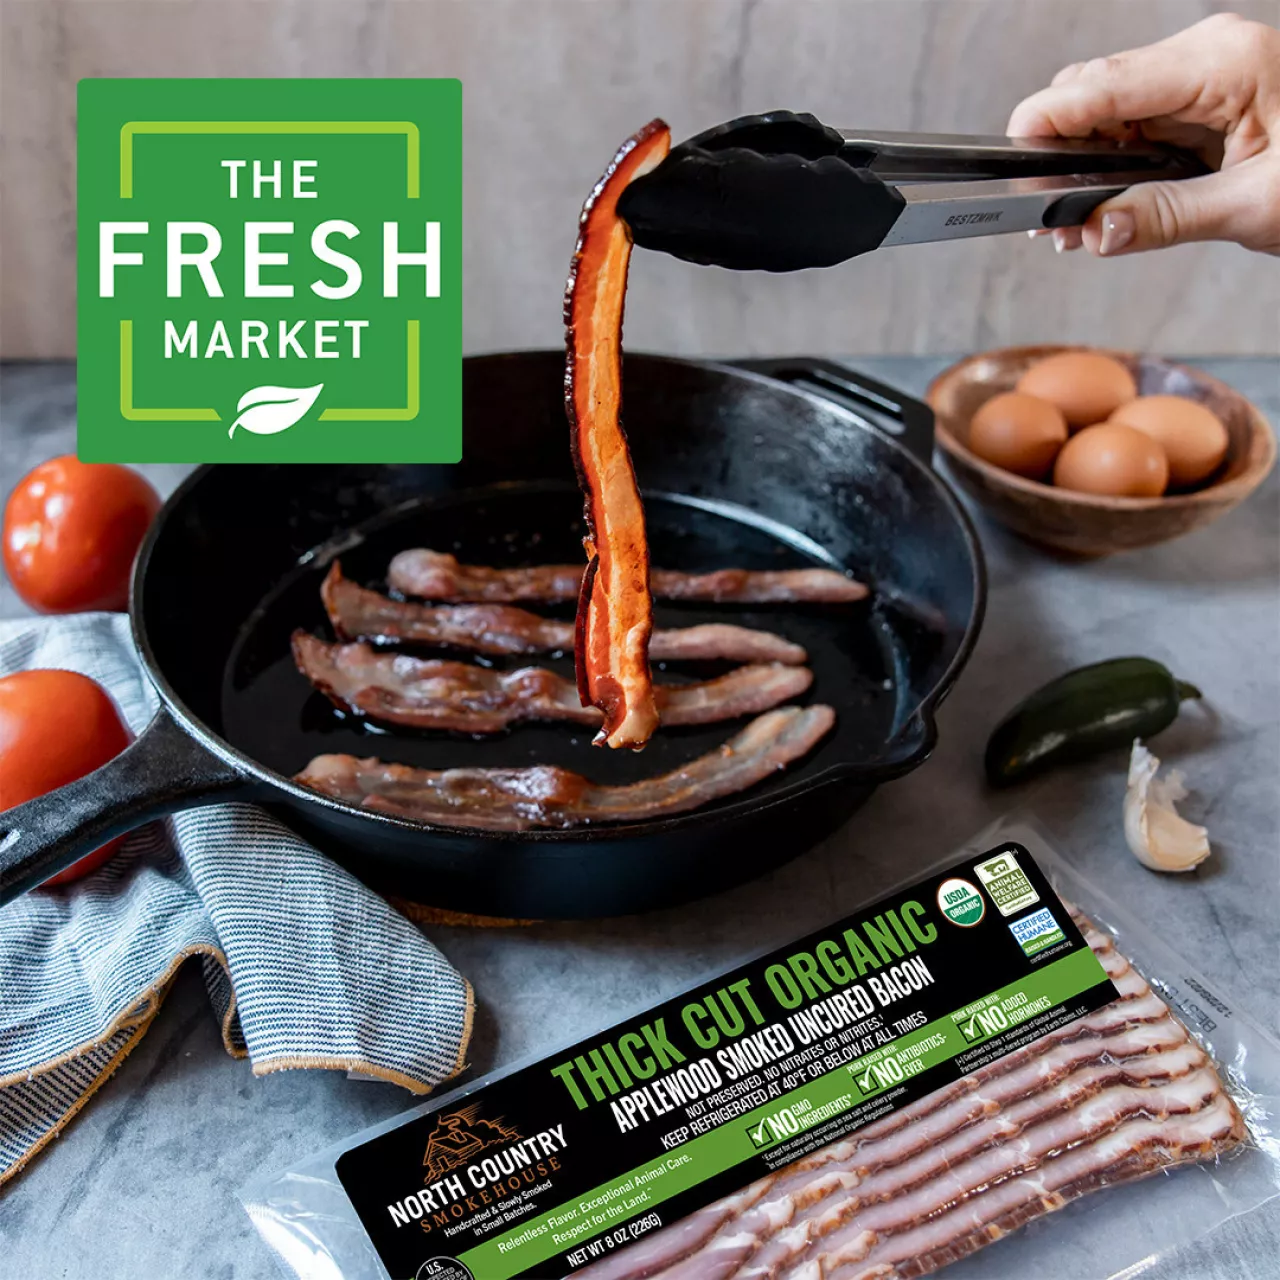 North Country Smokehouse Launches New Smoked Strips at The Fresh Market